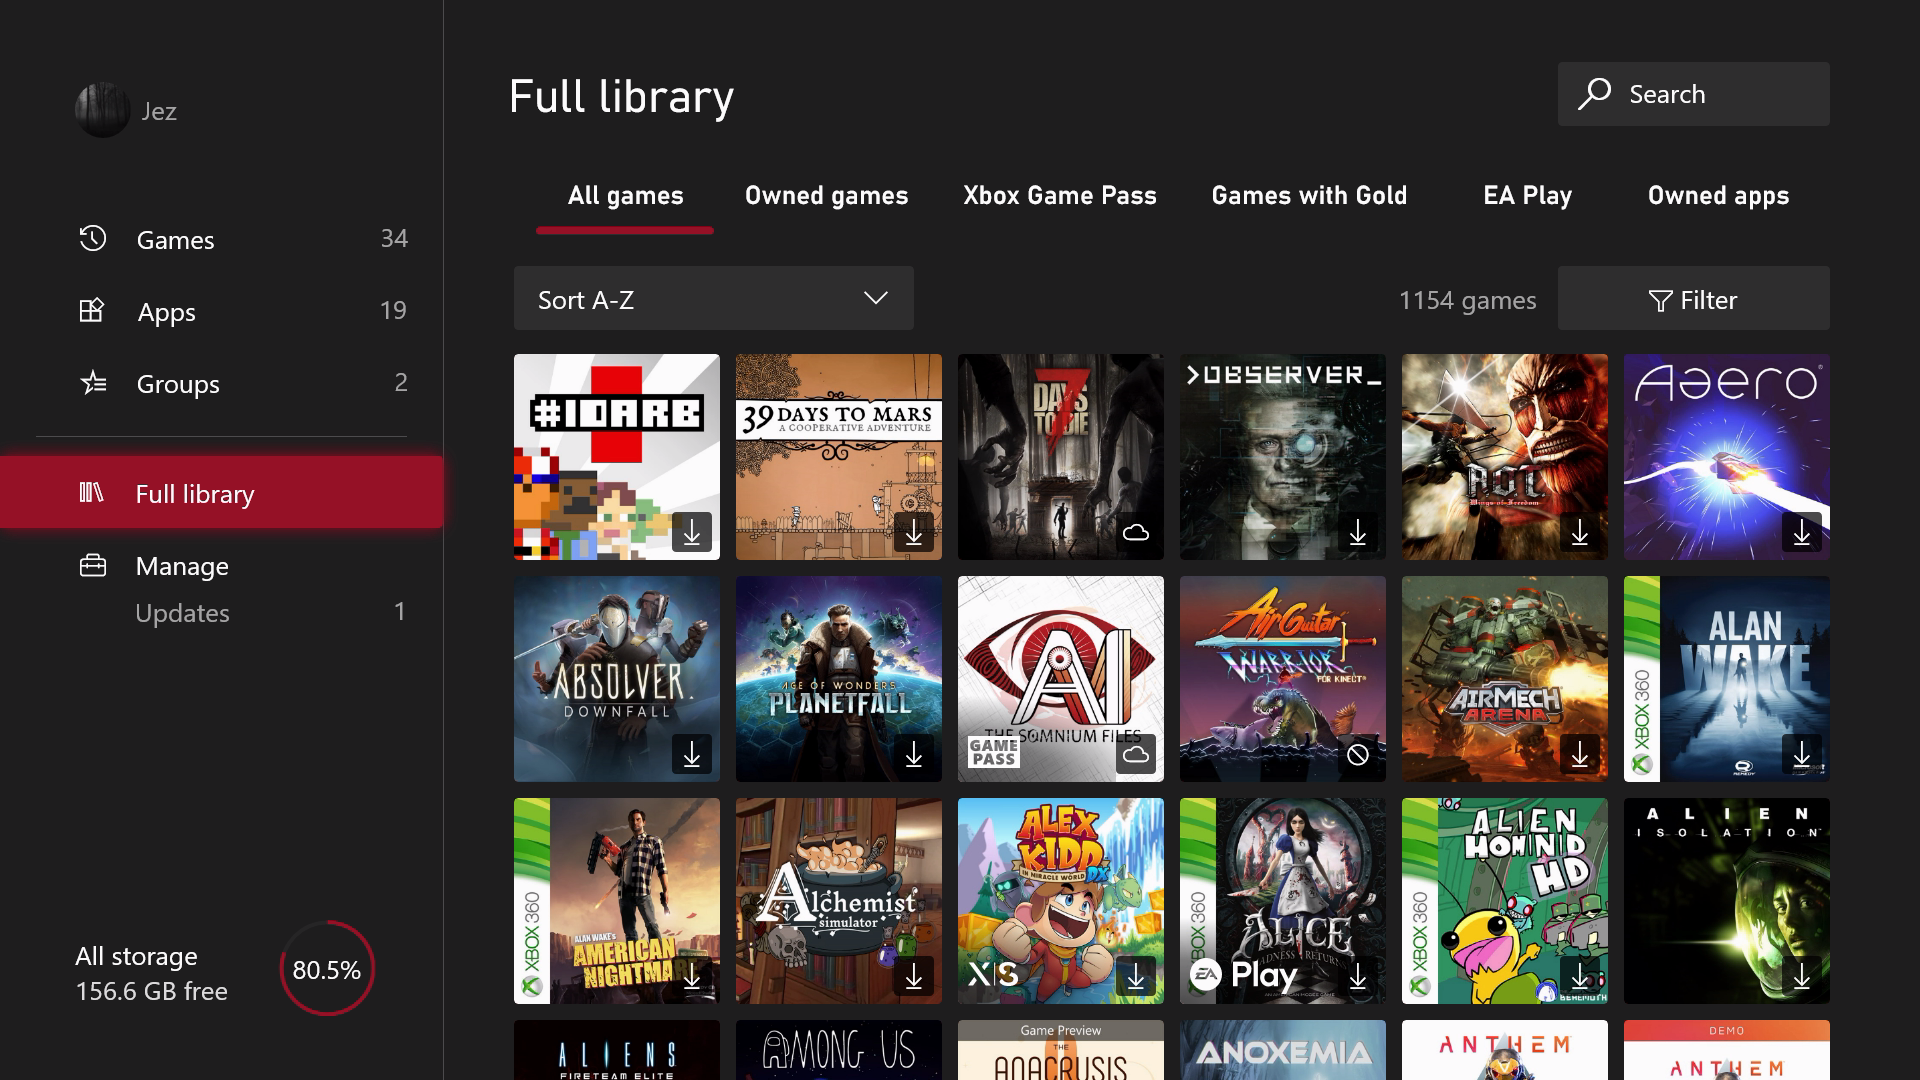 Xbox Full Games & Apps library redesigned from August 2022